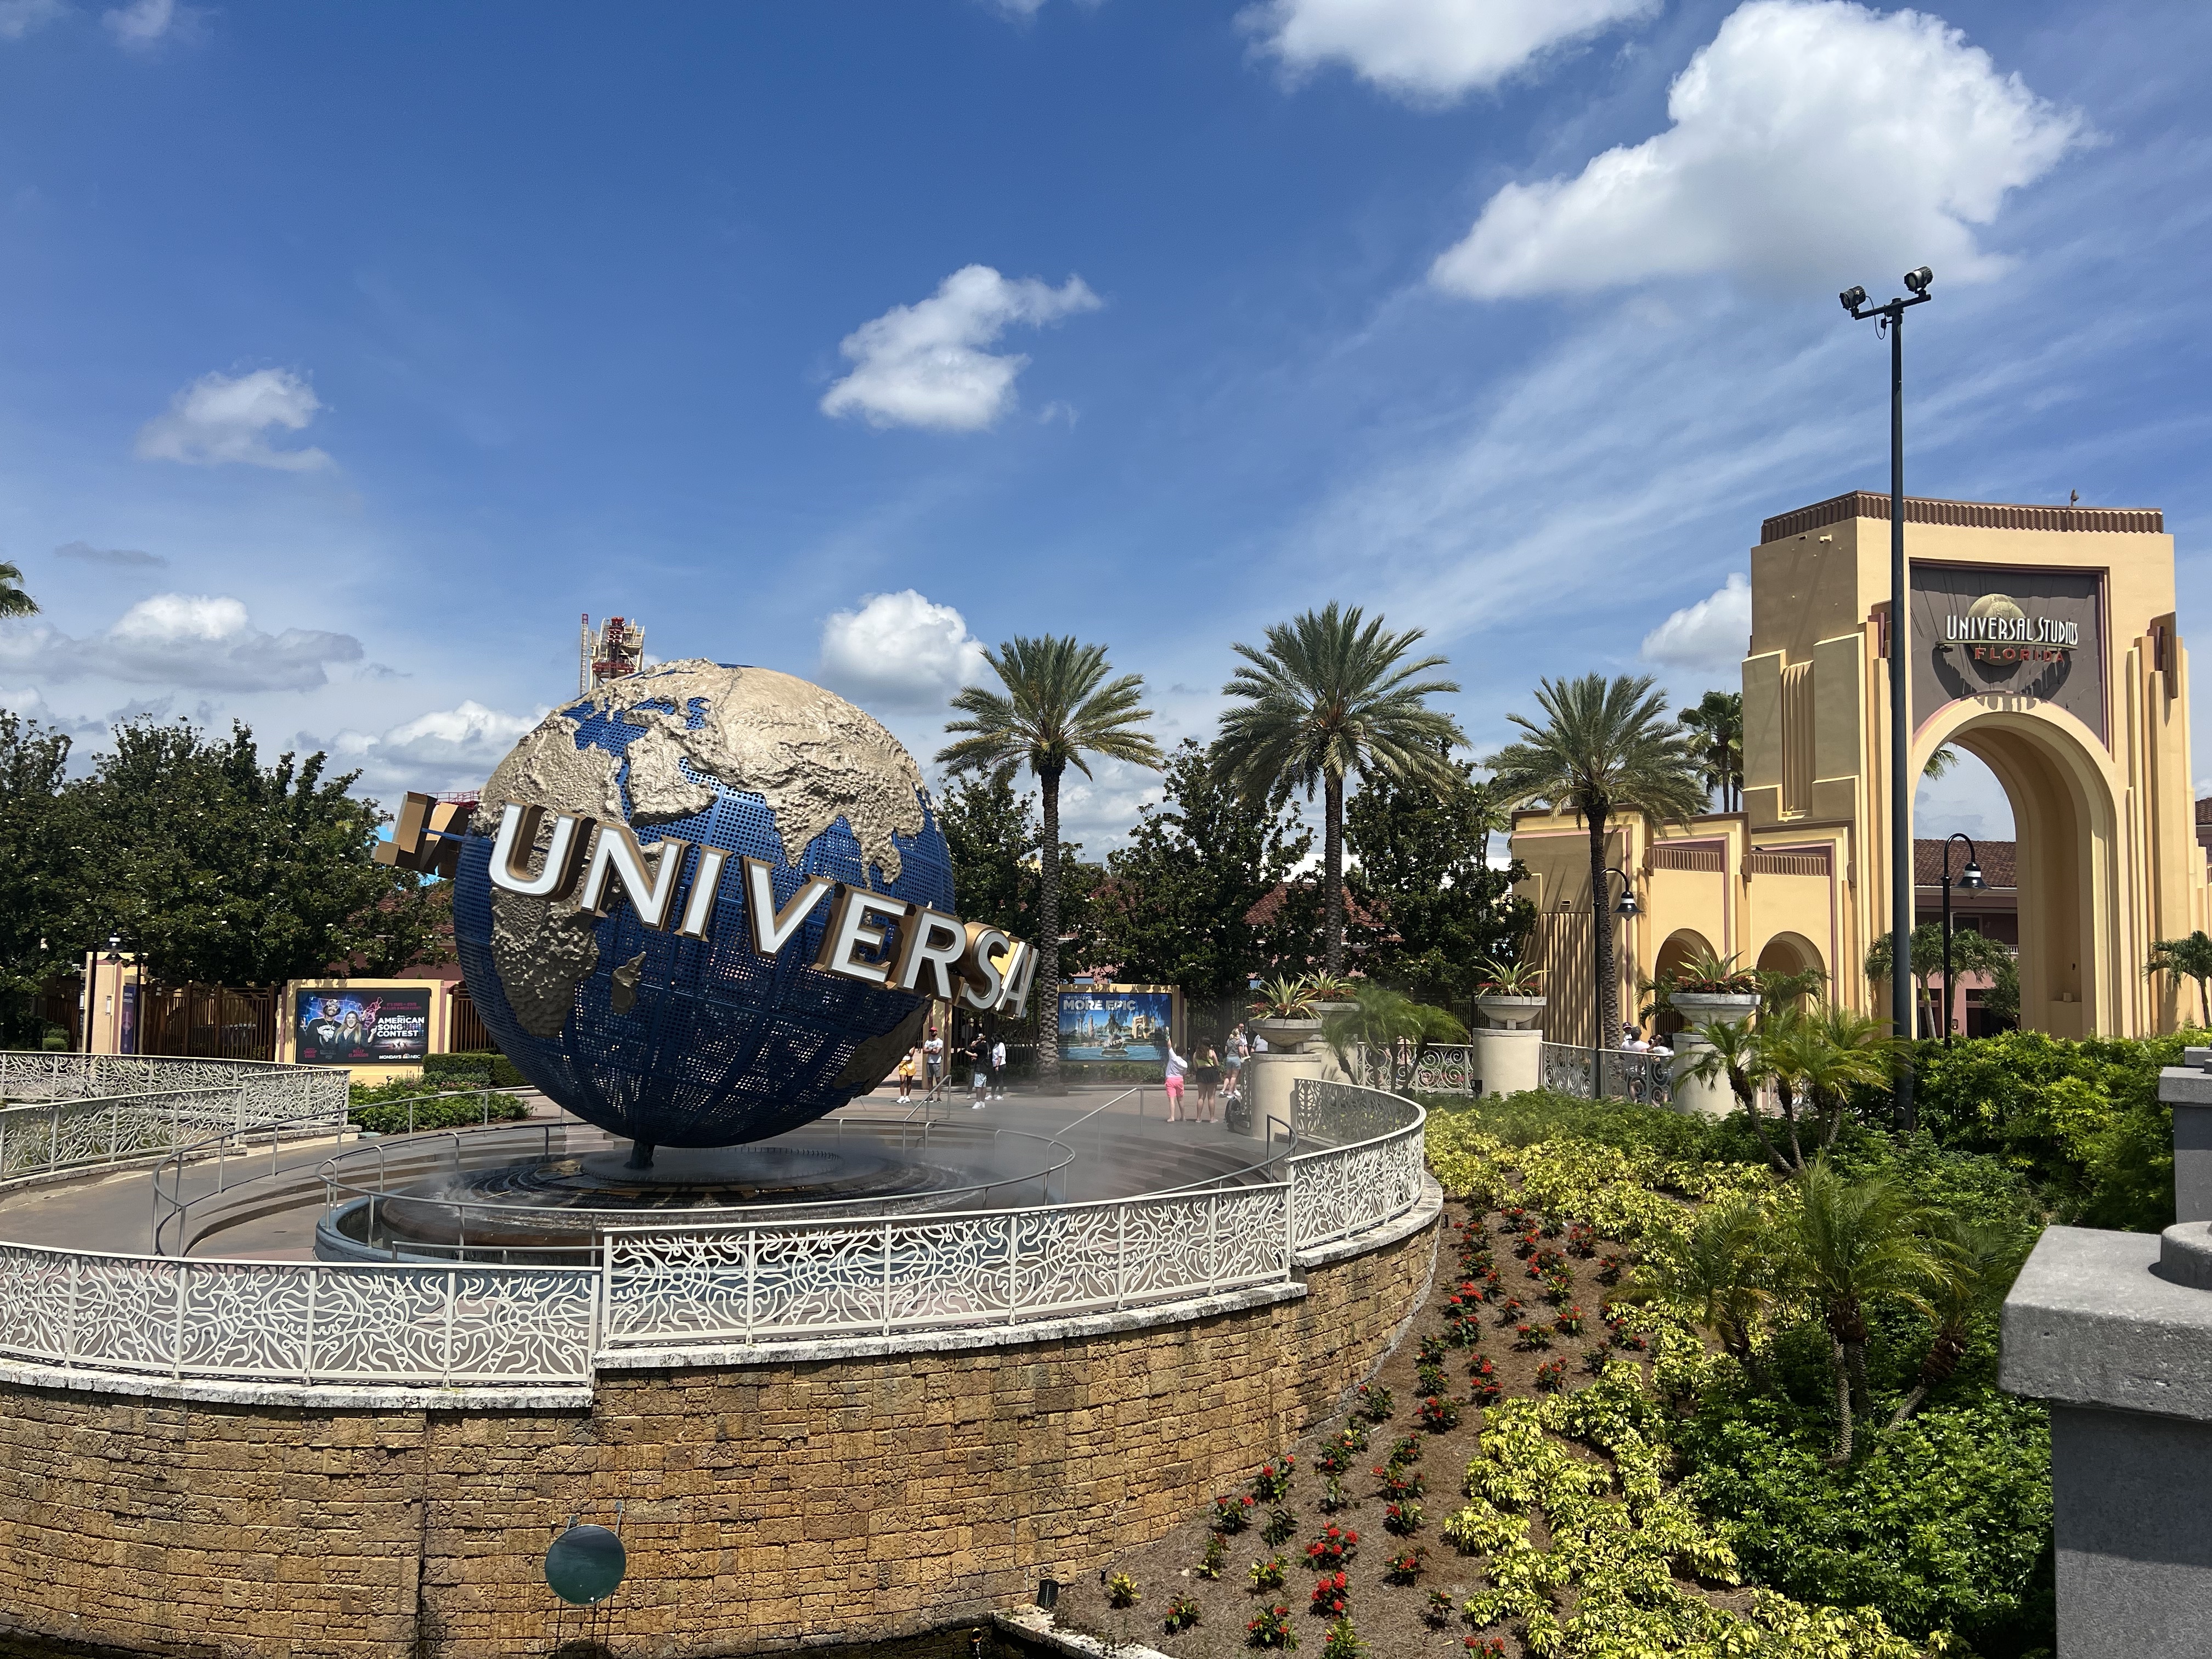 Universal implements new policy for minors at CityWalk